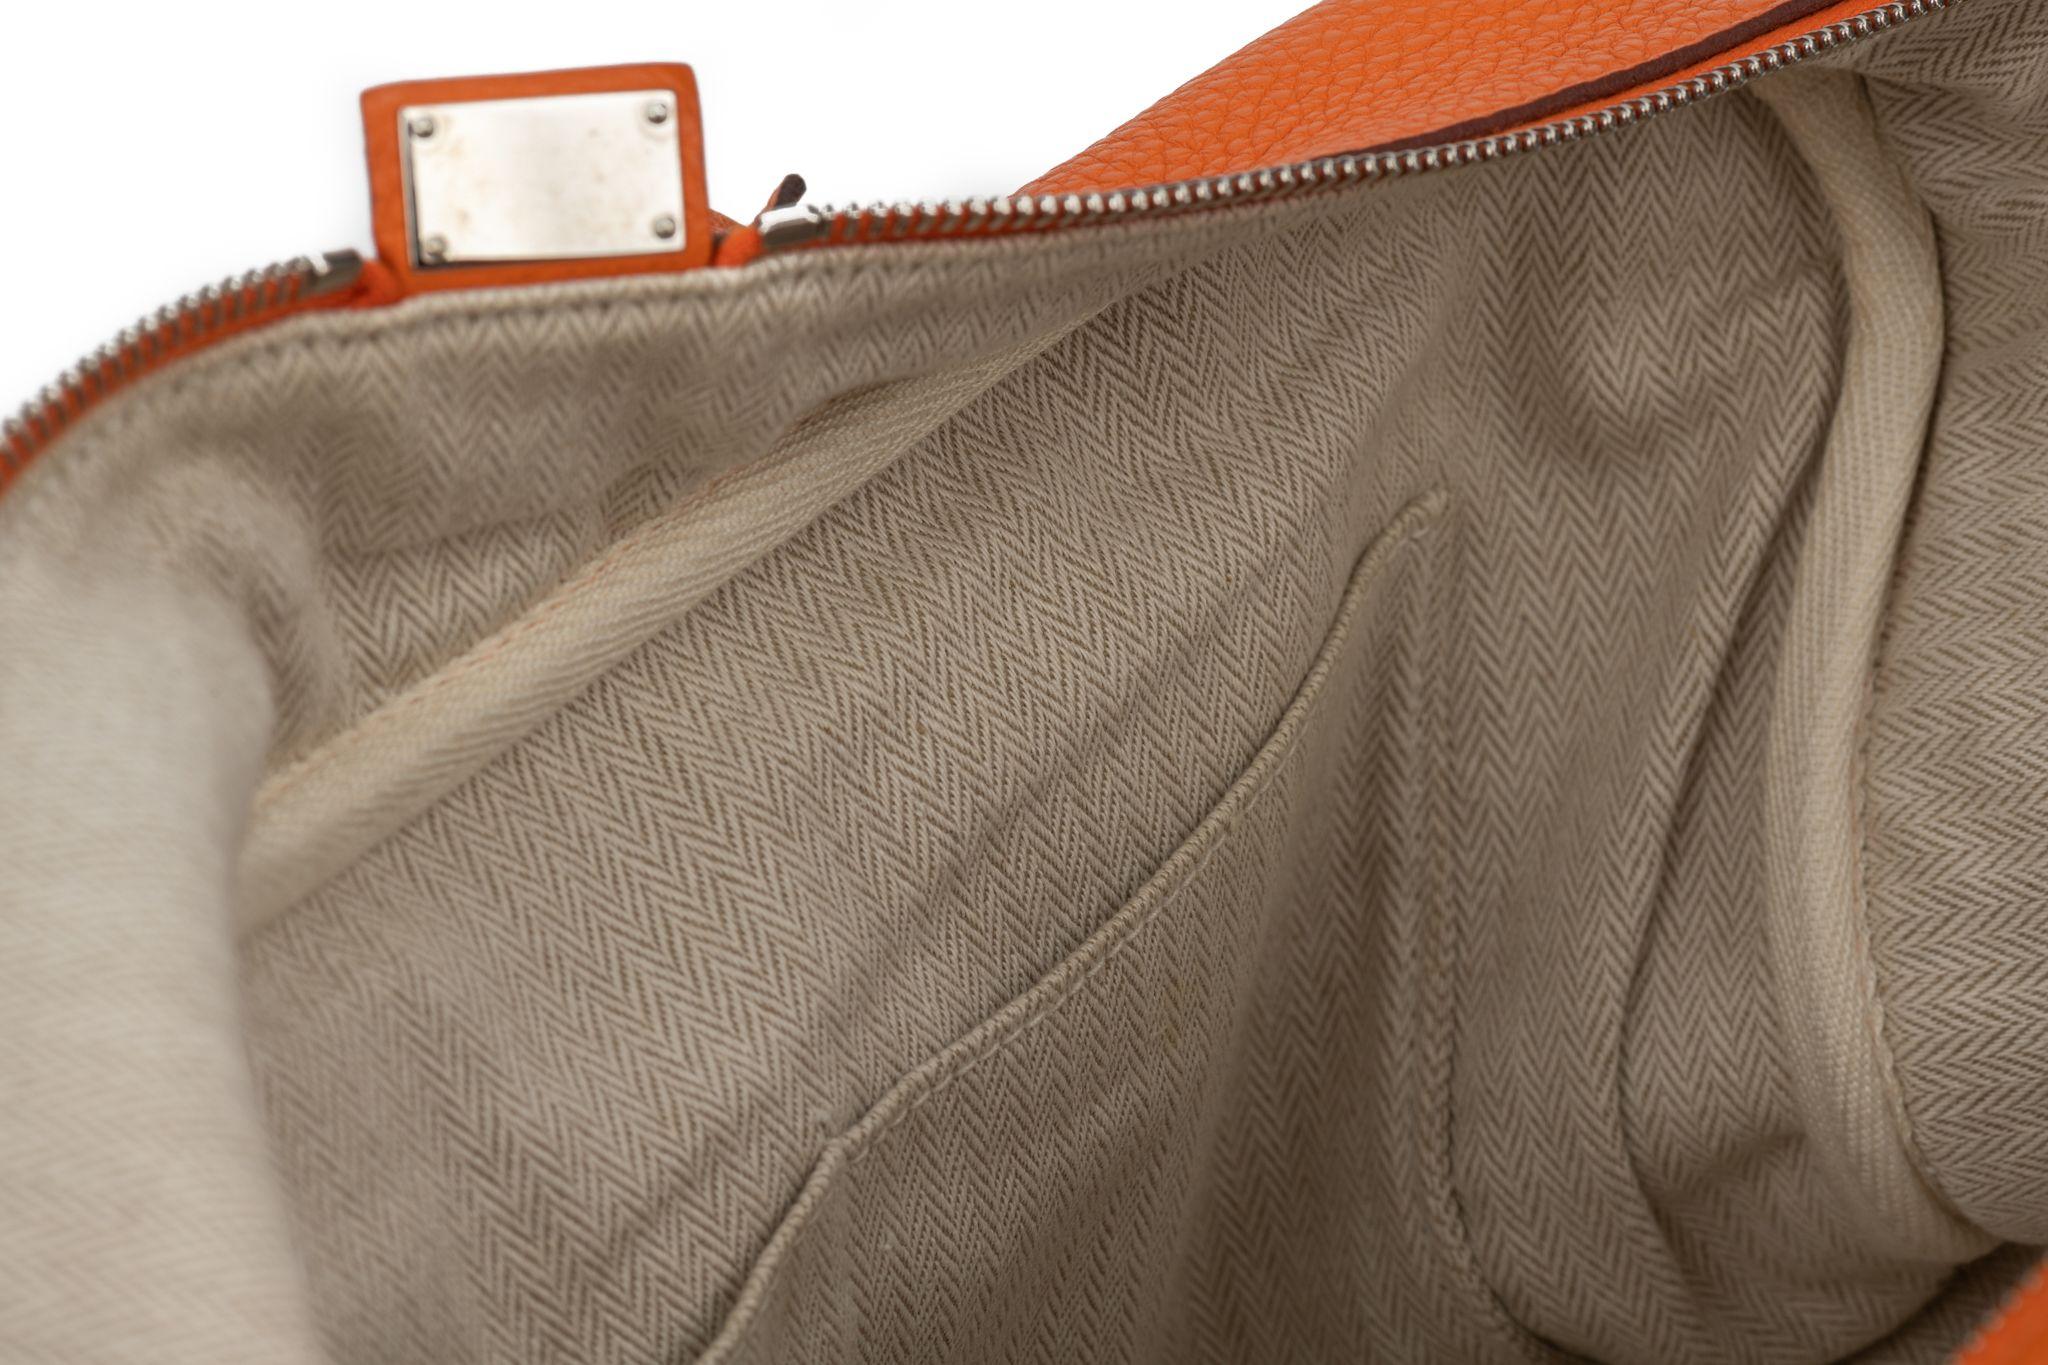 HERMÈS Victoria II 35 made of clemence leather in orange. The bag has palladium silver hardware and a beige canvas interior. The handle drops 8'. The item comes with the original dustcover.